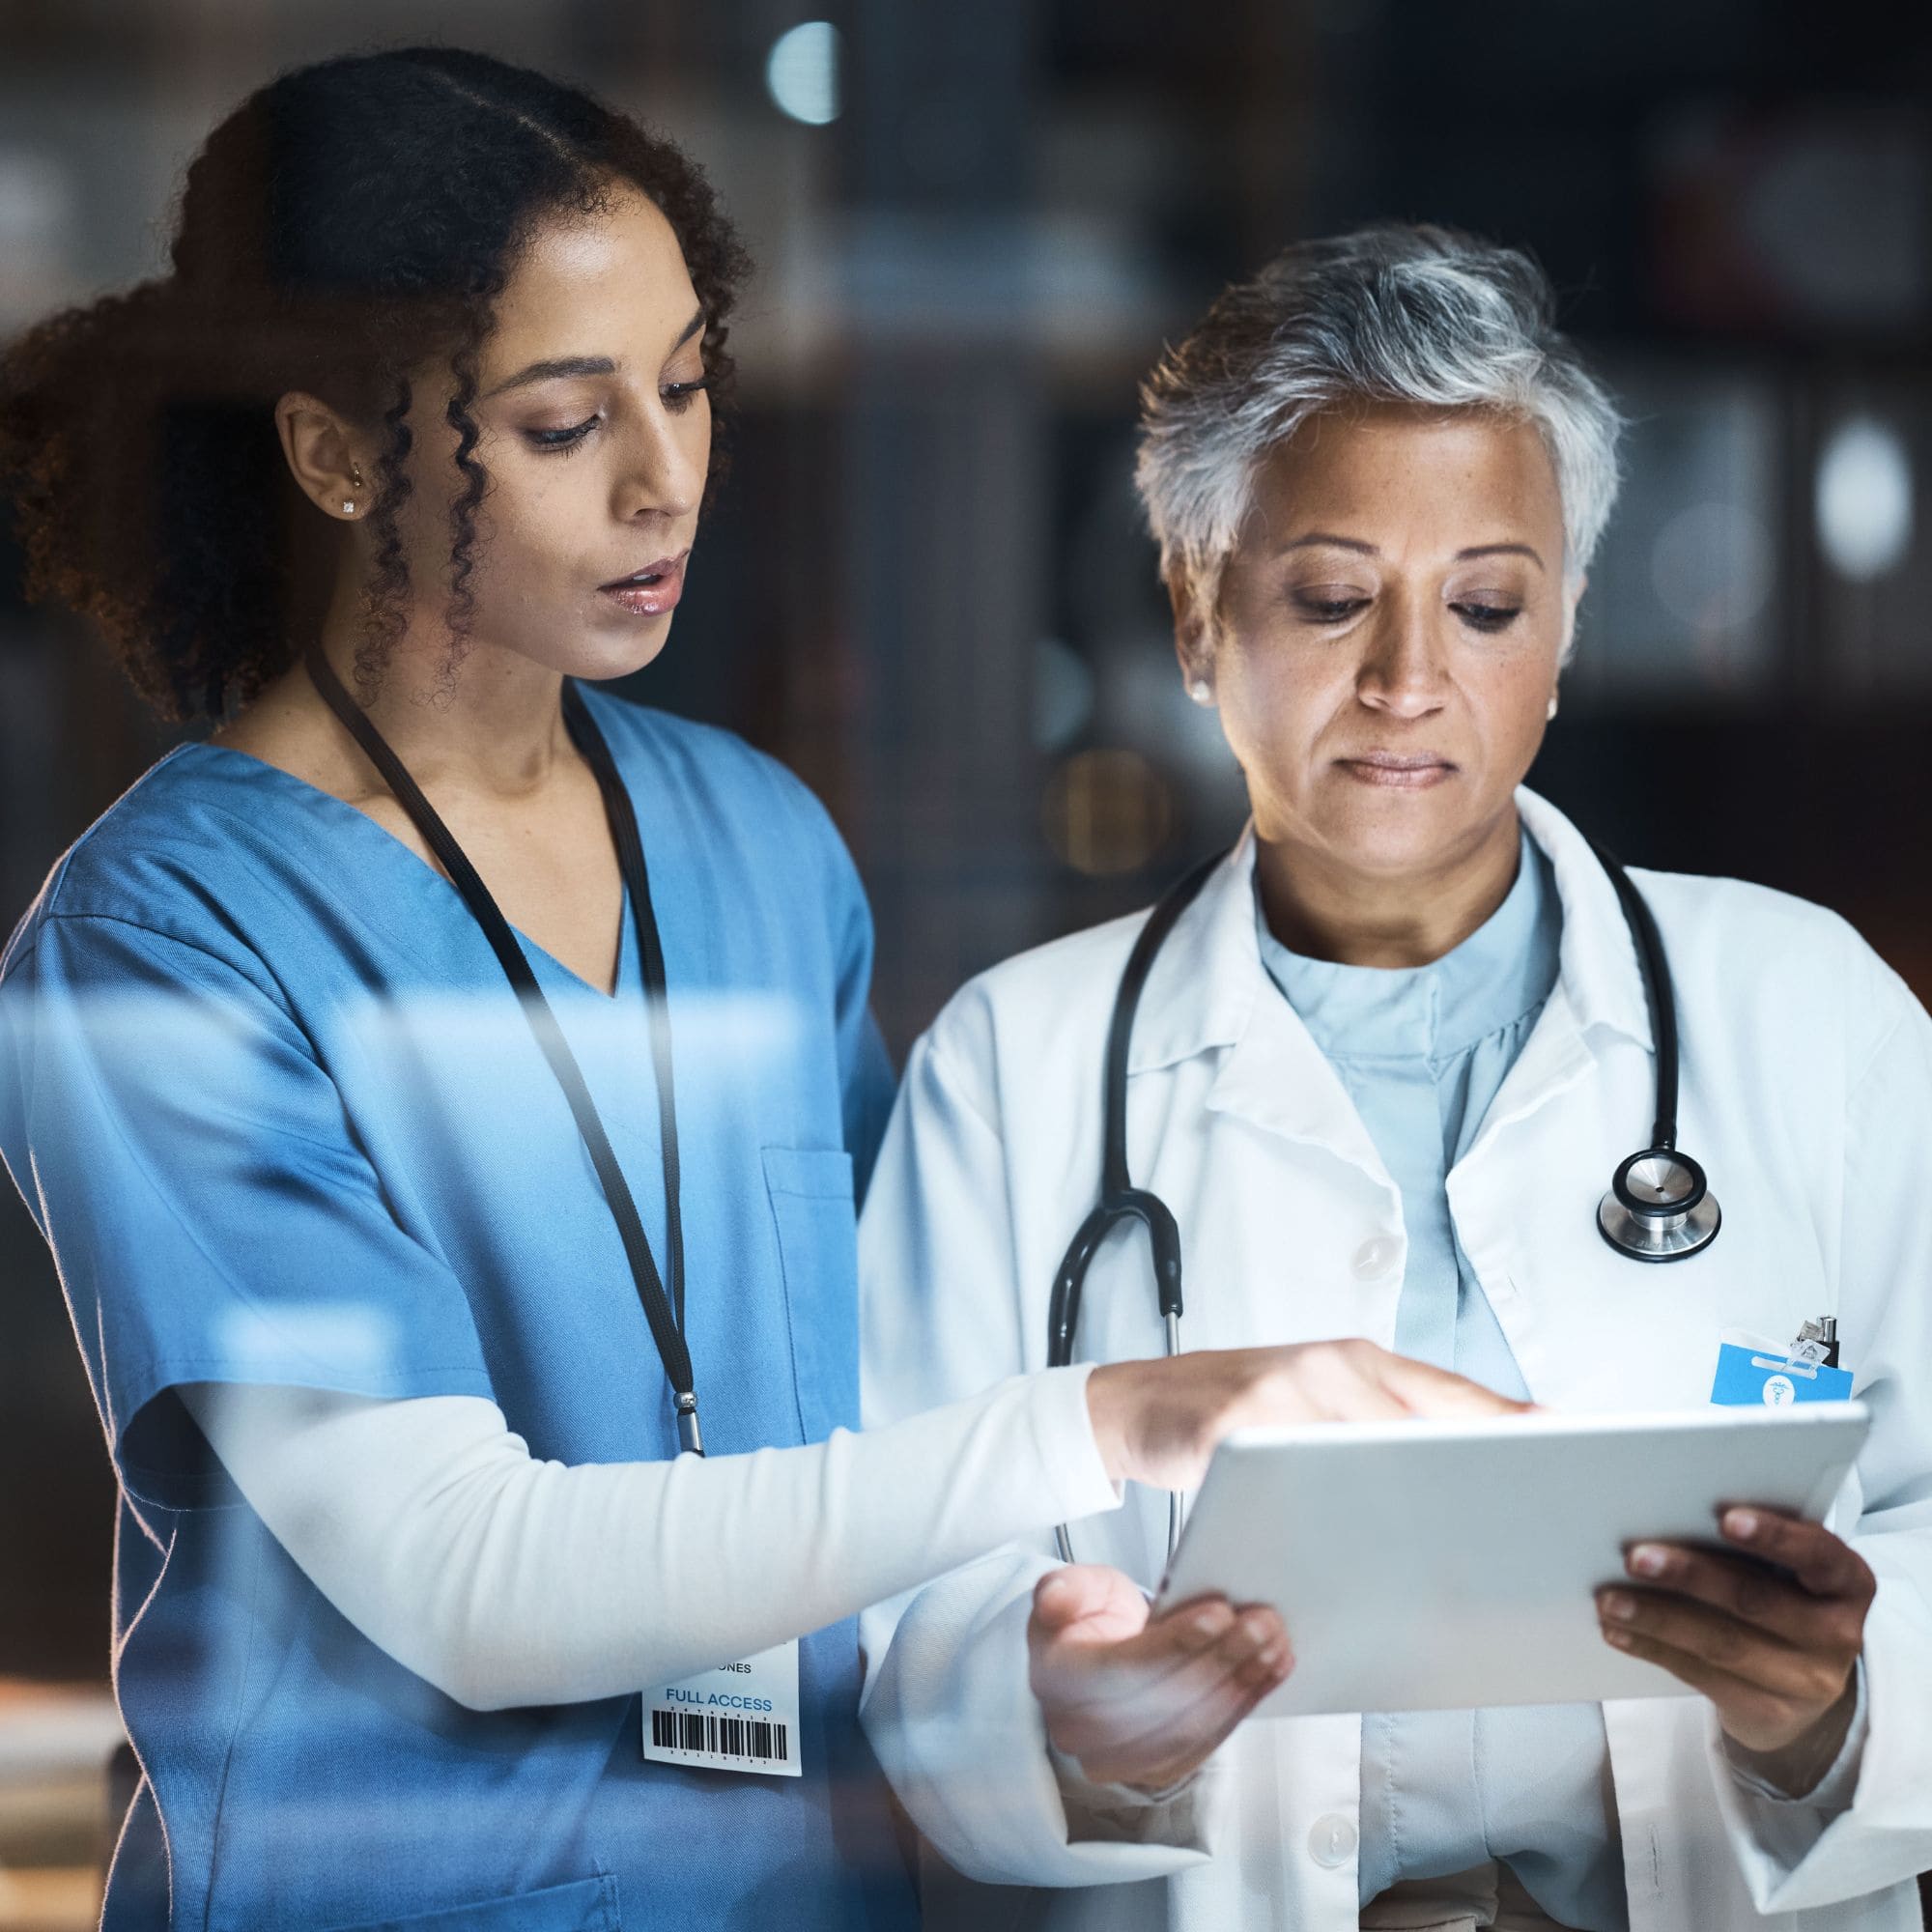 Female nurse looking at tablet with female doctor